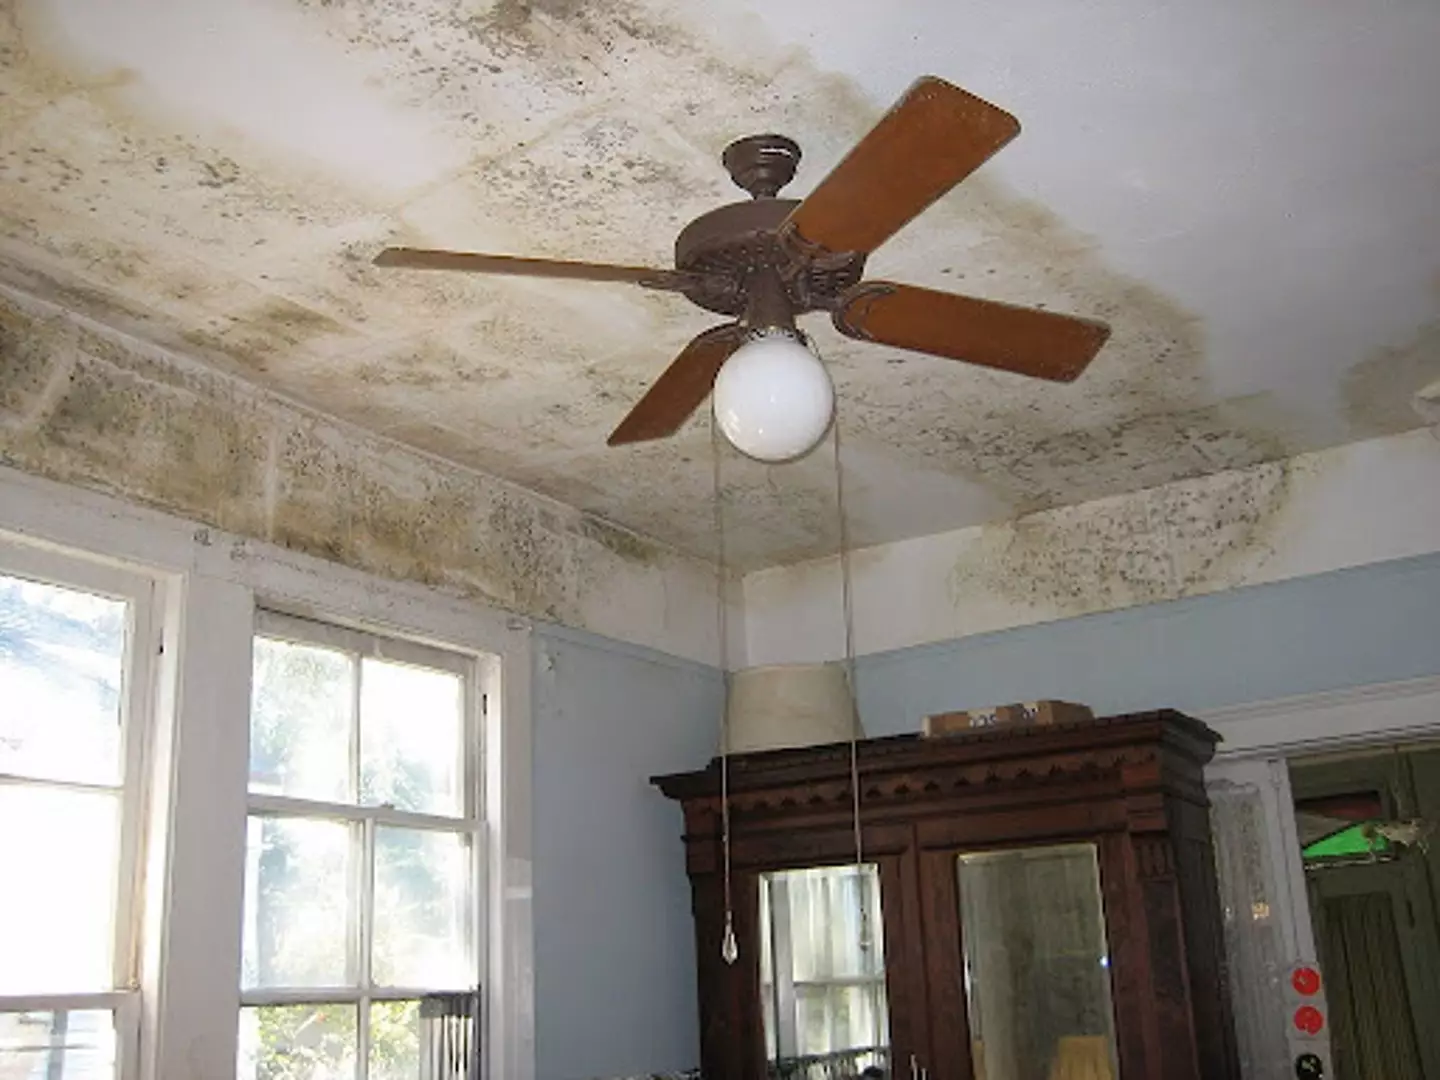 When mould appears in houses, it's a cause for concern.